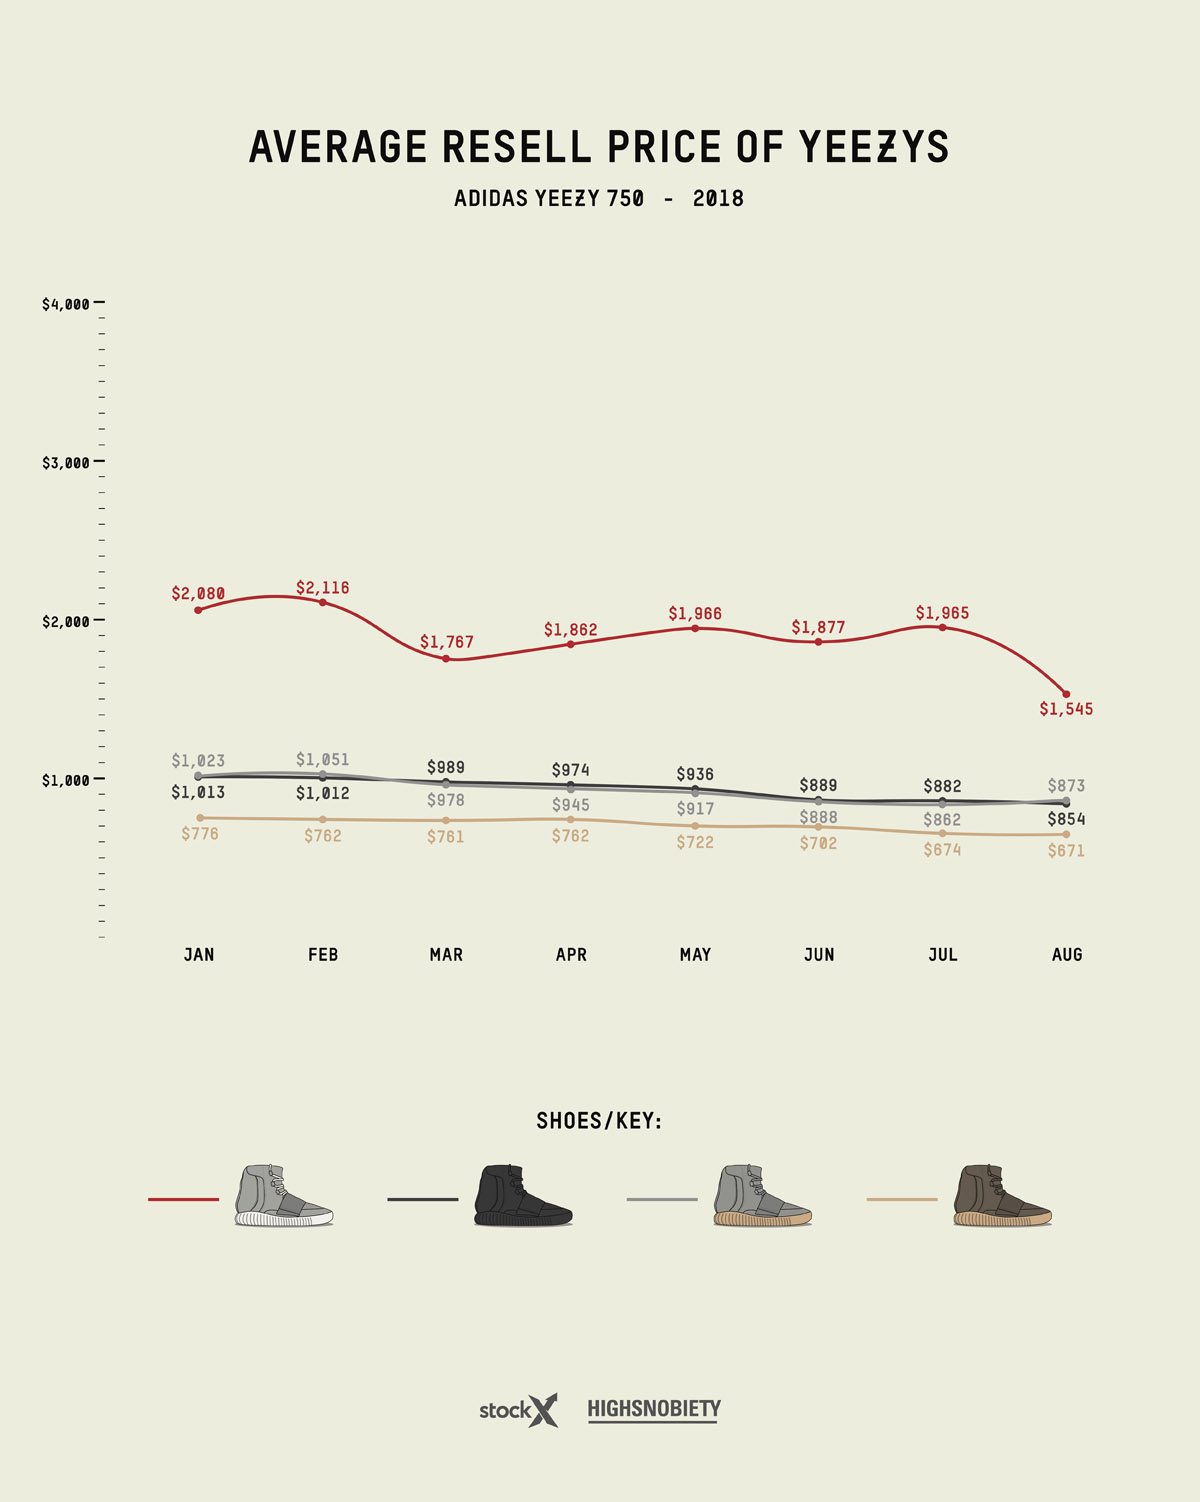 yeezy resell price guide 2019 update adidas Originals YEEZY Boost kanye west